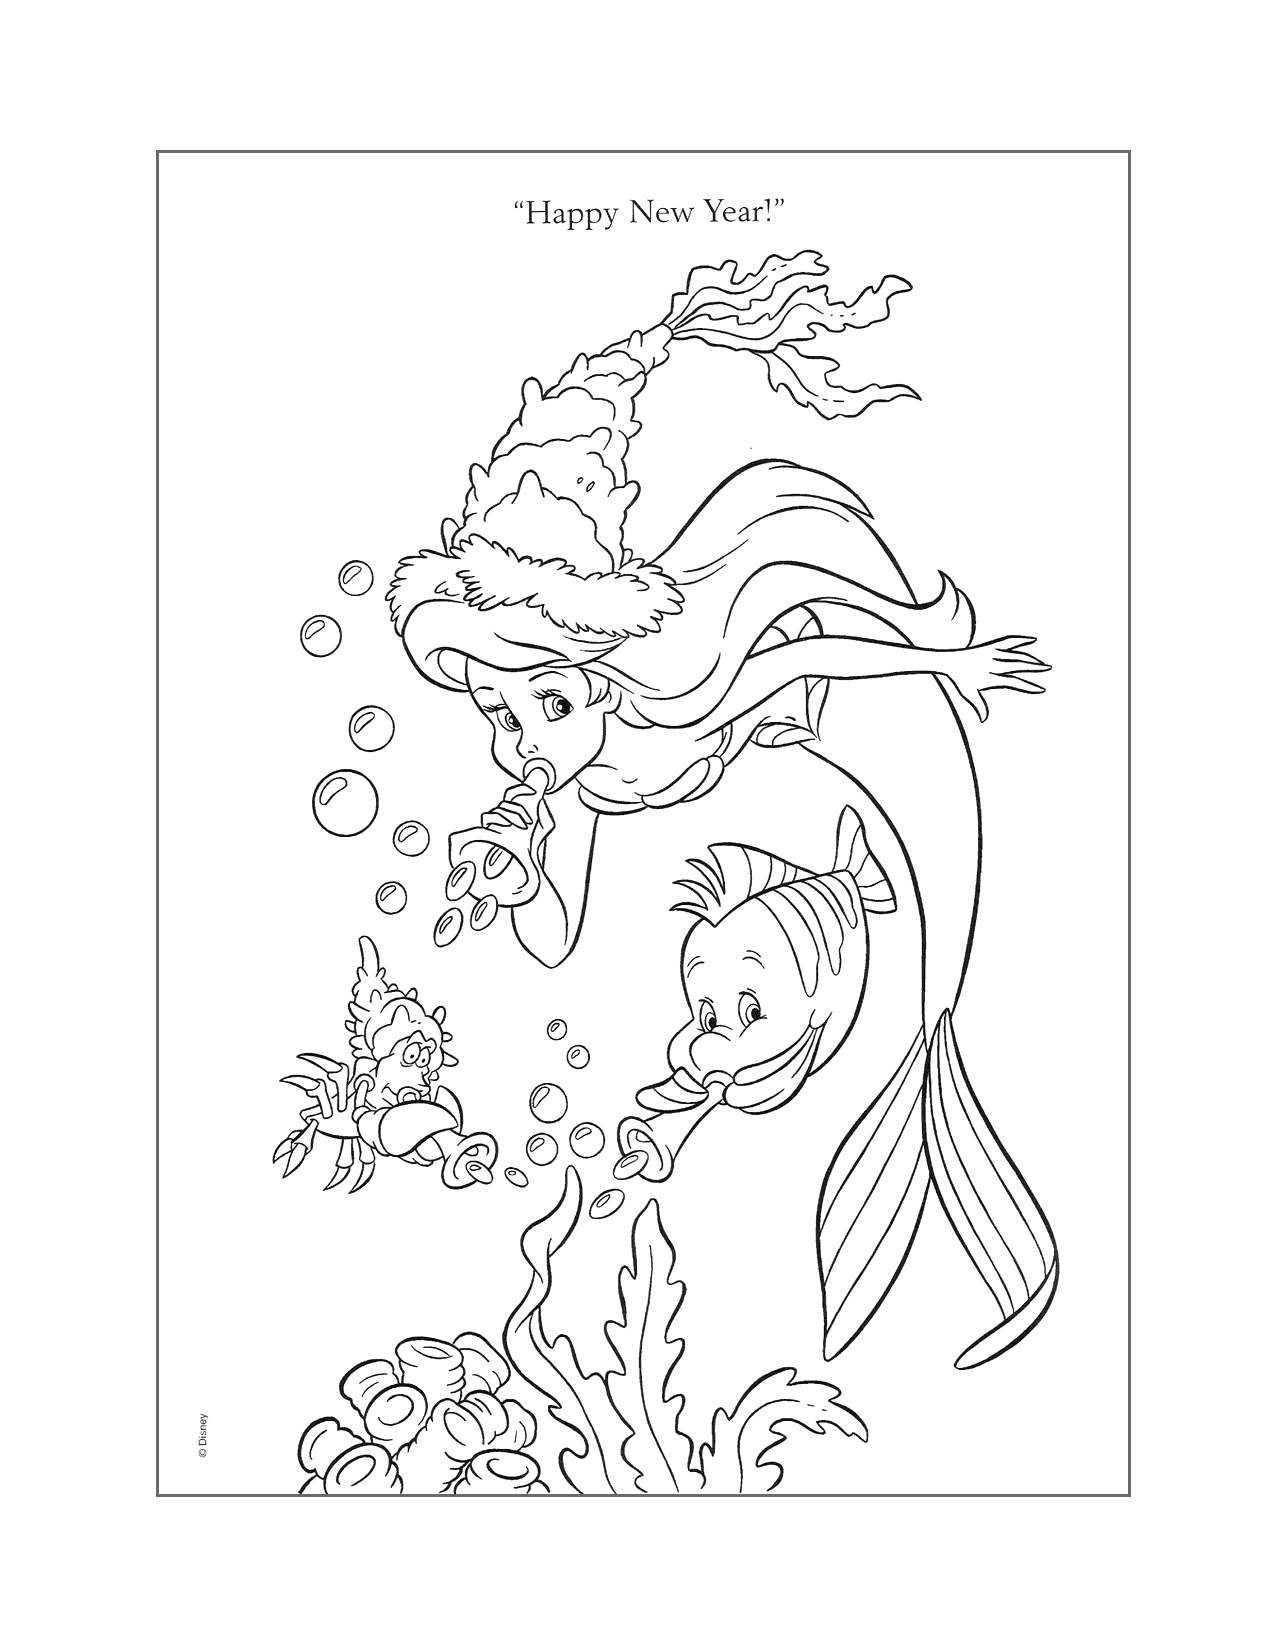 Happy New Year Little Mermaid Coloring Page